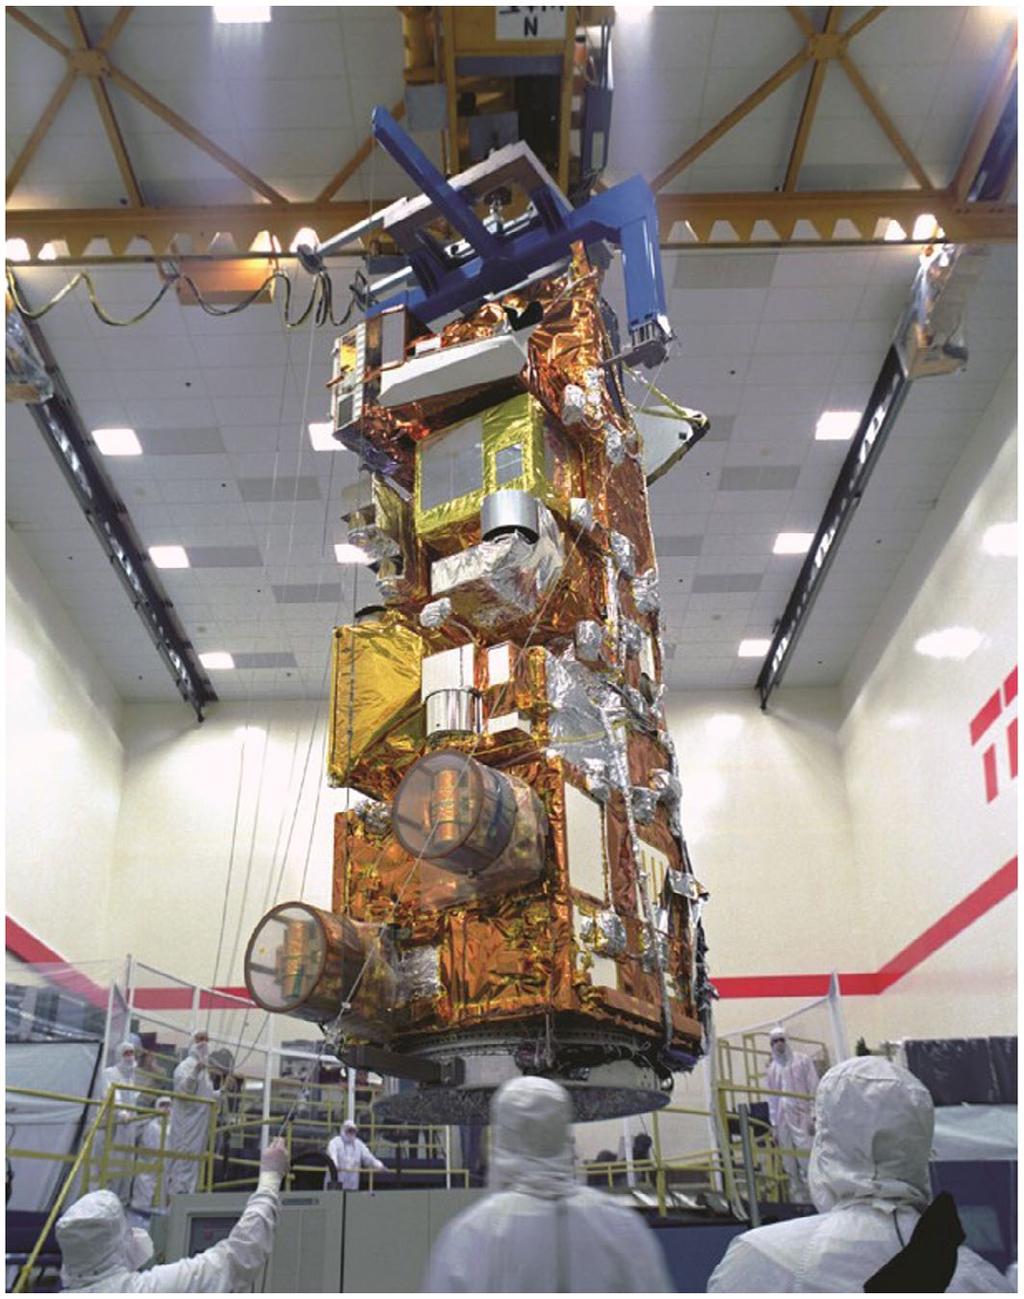 Figure 3. The Aqua spacecraft prior to launch. Source: Photo by Sally Aristei. Research 4. What kind of climate research do you do at NASA?